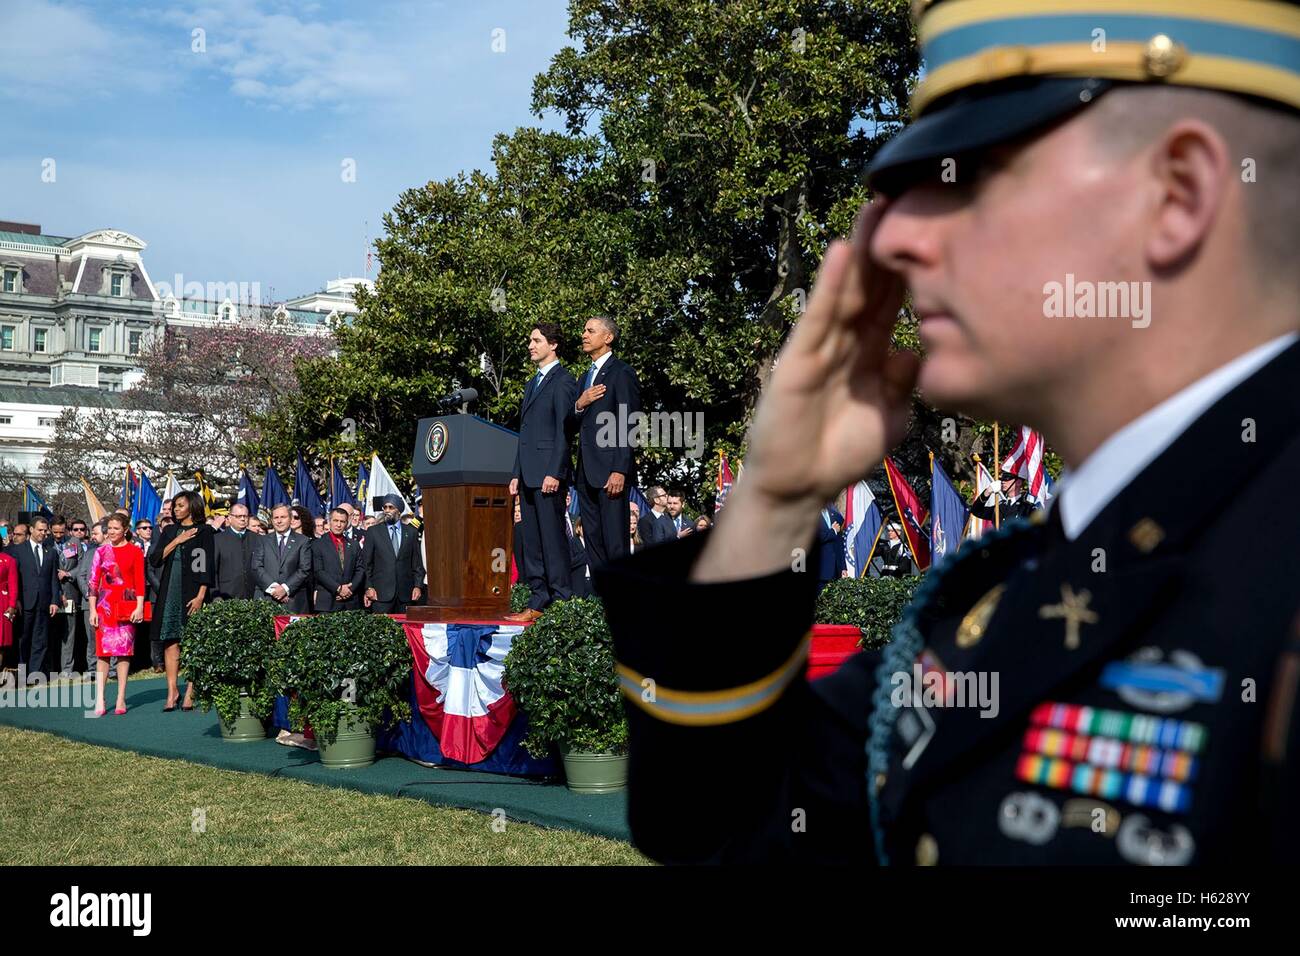 U.S. President Barack Obama and Canadian Prime Minister Justin Trudeau stand during the U.S. national anthem at the Canada State Arrival ceremony on the White House South Lawn March 10, 2016 in Washington, DC. Stock Photo